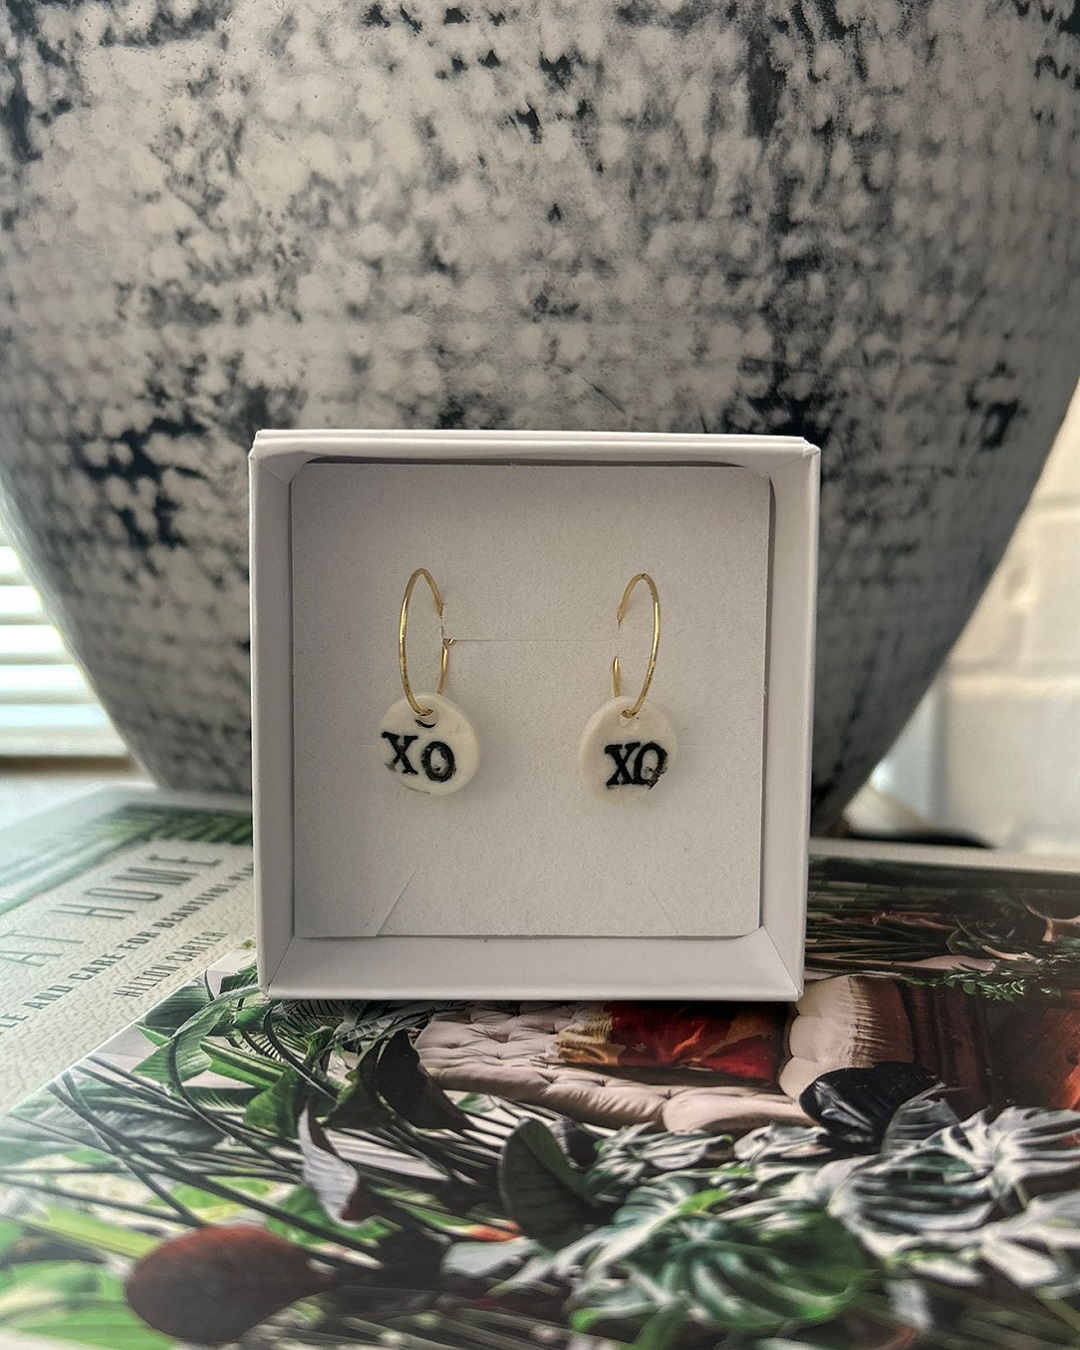 XO black on white circle earrings hanging in a box